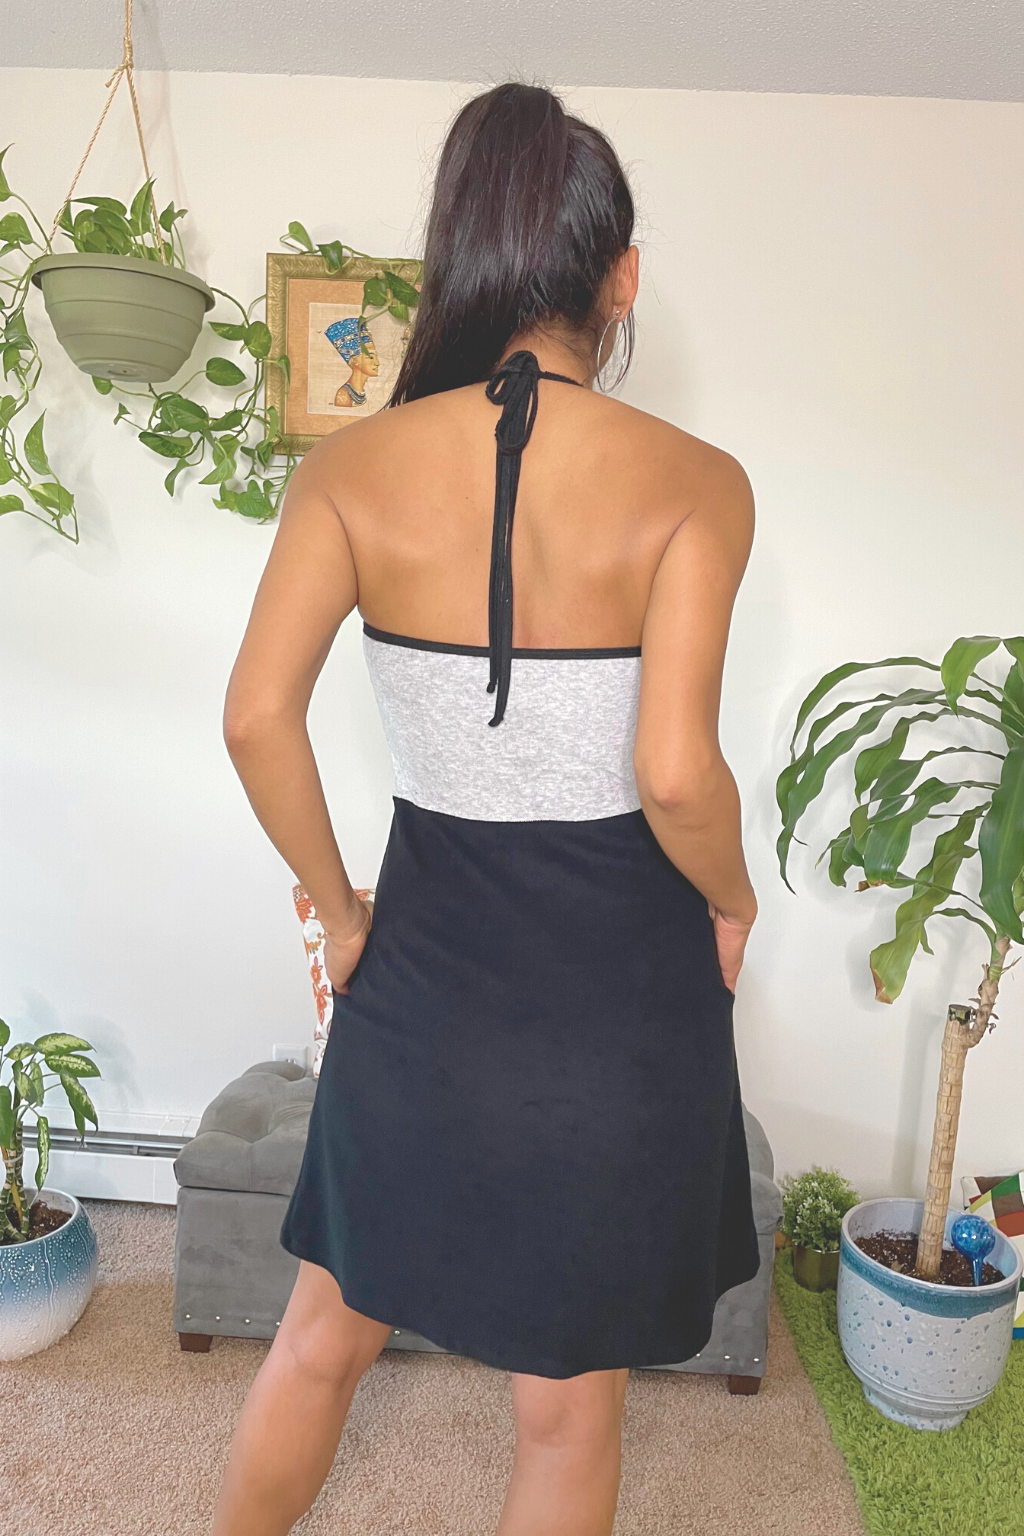 KOKOON Very Terry 3 color Halter Dress With Pockets in Aqua Heather Grey and Black Loop Terry Cloth Back